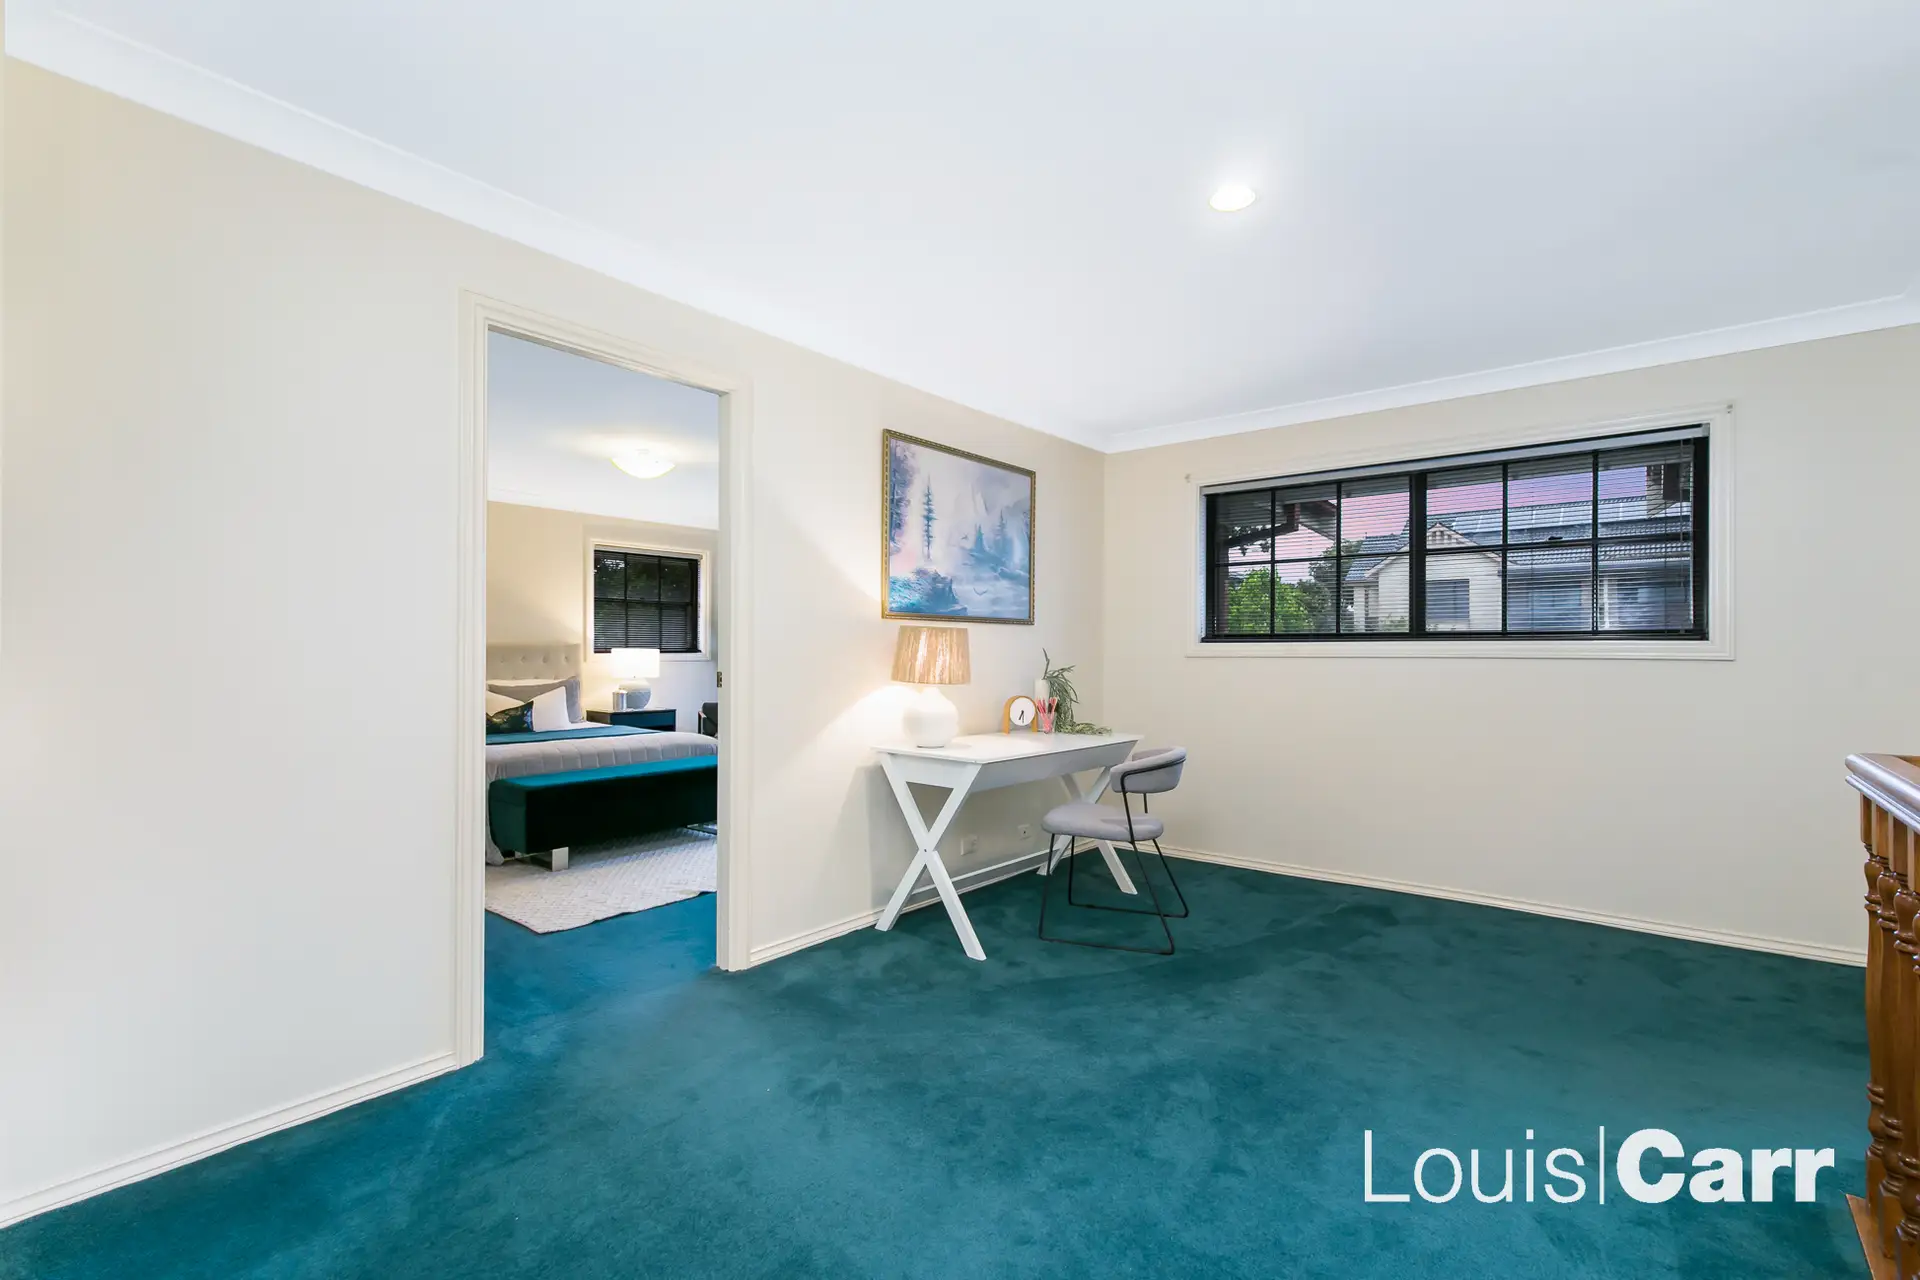 Photo #5: 8 Barton Avenue, West Pennant Hills - Sold by Louis Carr Real Estate